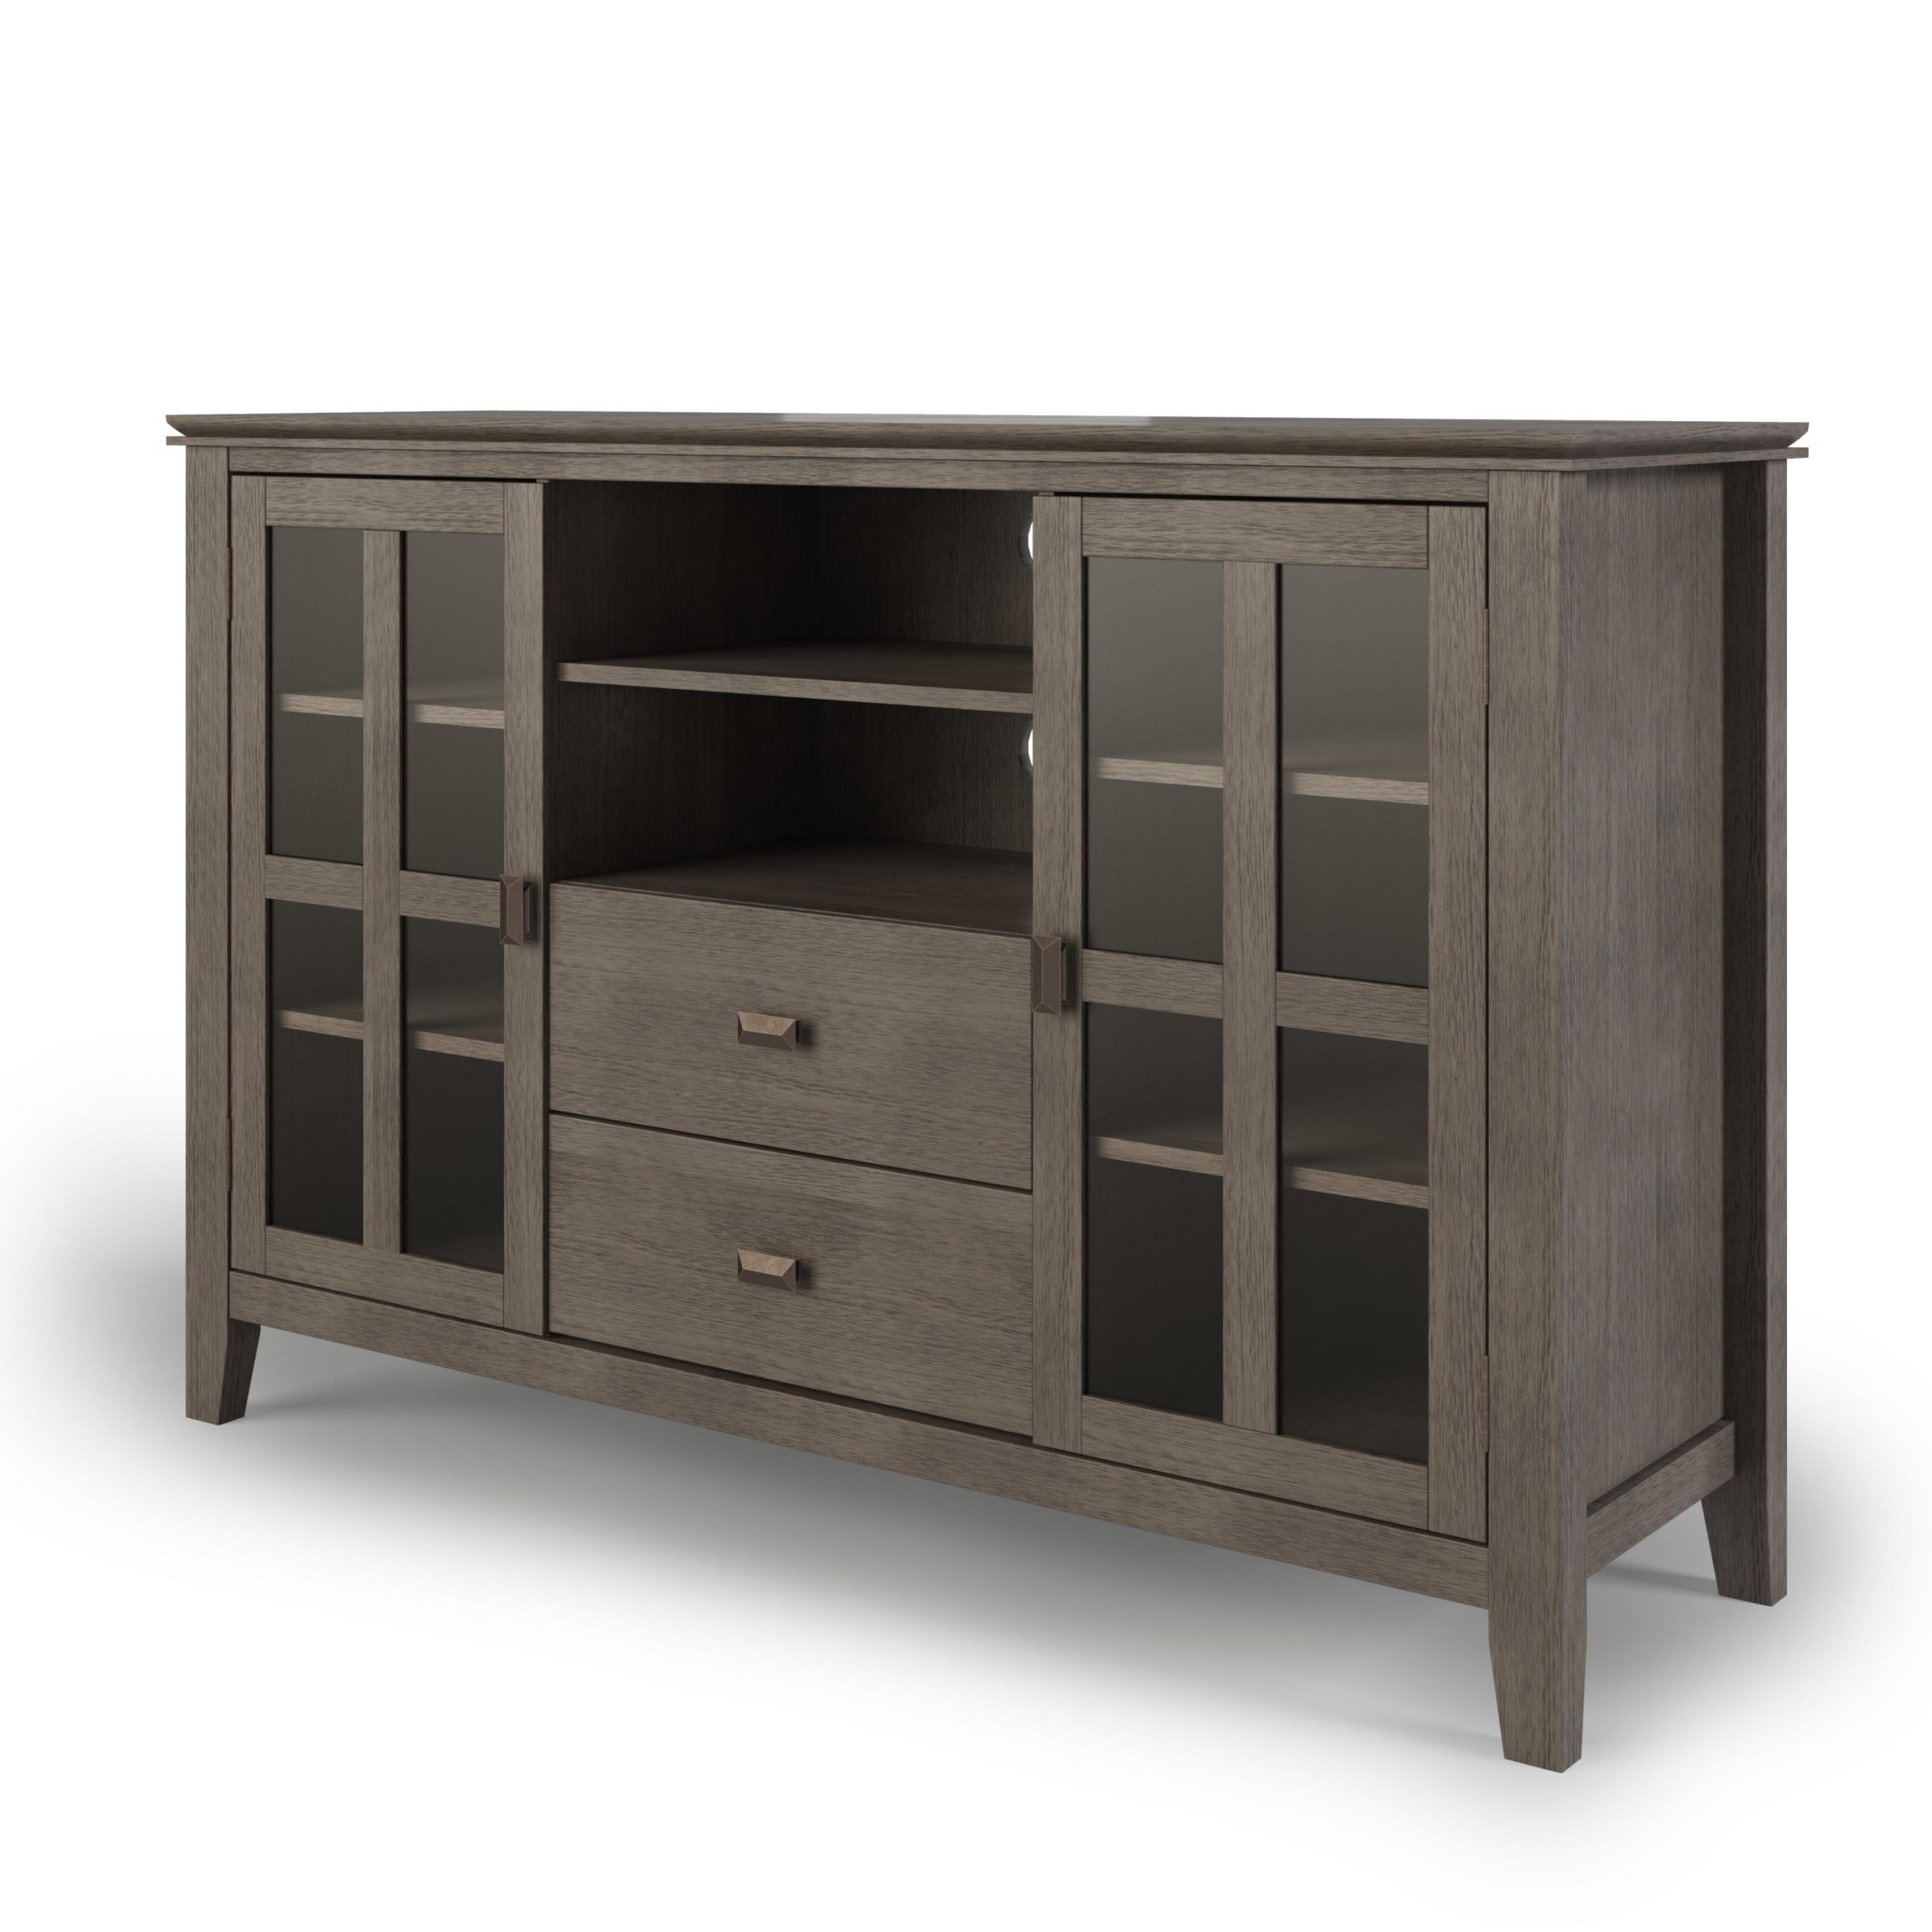 Artisan Solid Wood 53 Inch Wide Contemporary Tv Media For Greenwich Wide Tv Stands (Gallery 9 of 20)